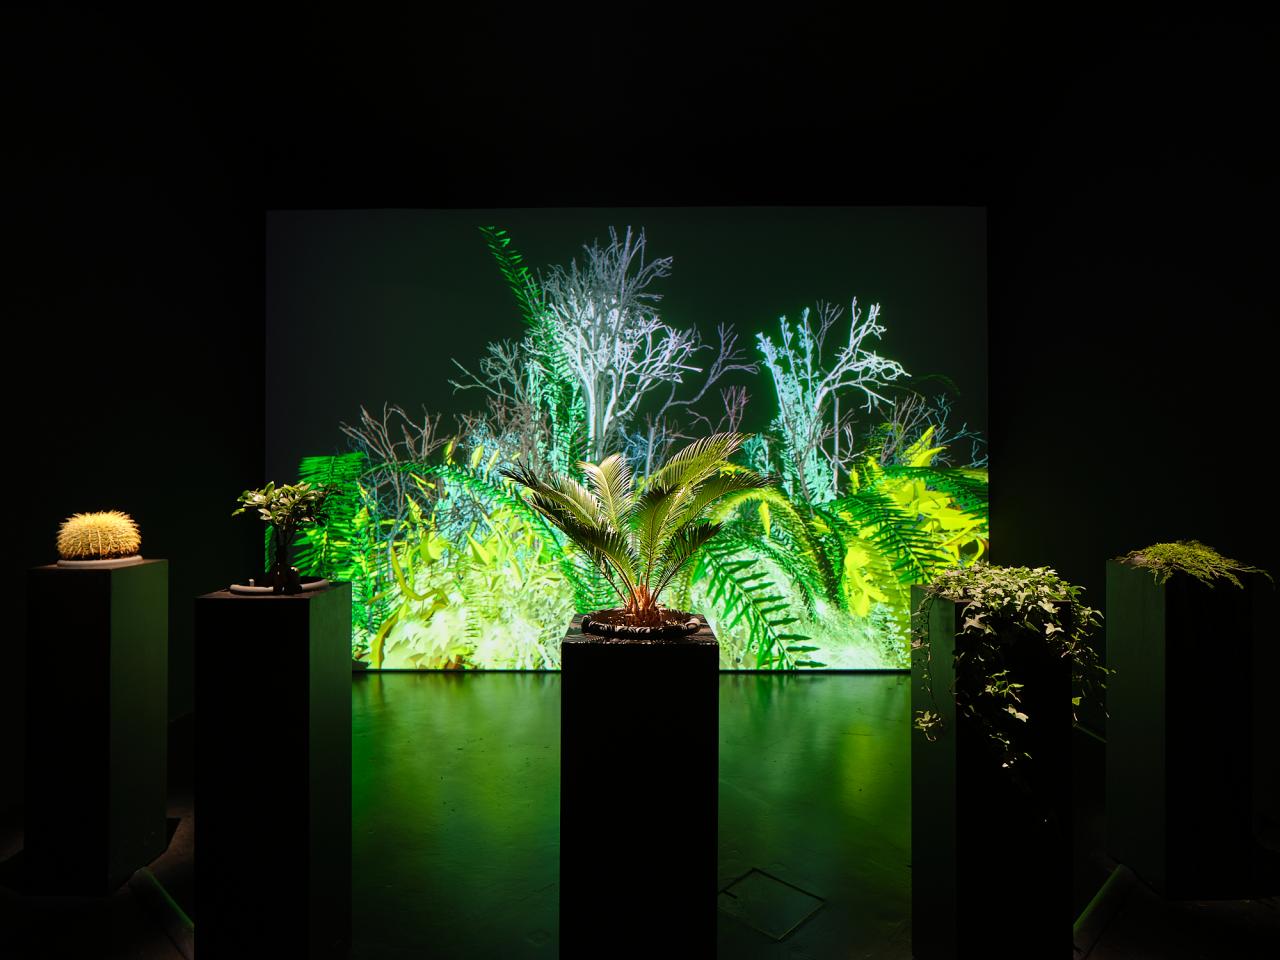 On display is the work "Interactive Plant Growing". A total view shows a variation of plants hanging in pots from the ceiling and arranged in a semicircle in front of a screen. The colors hold up in varying shades of green.